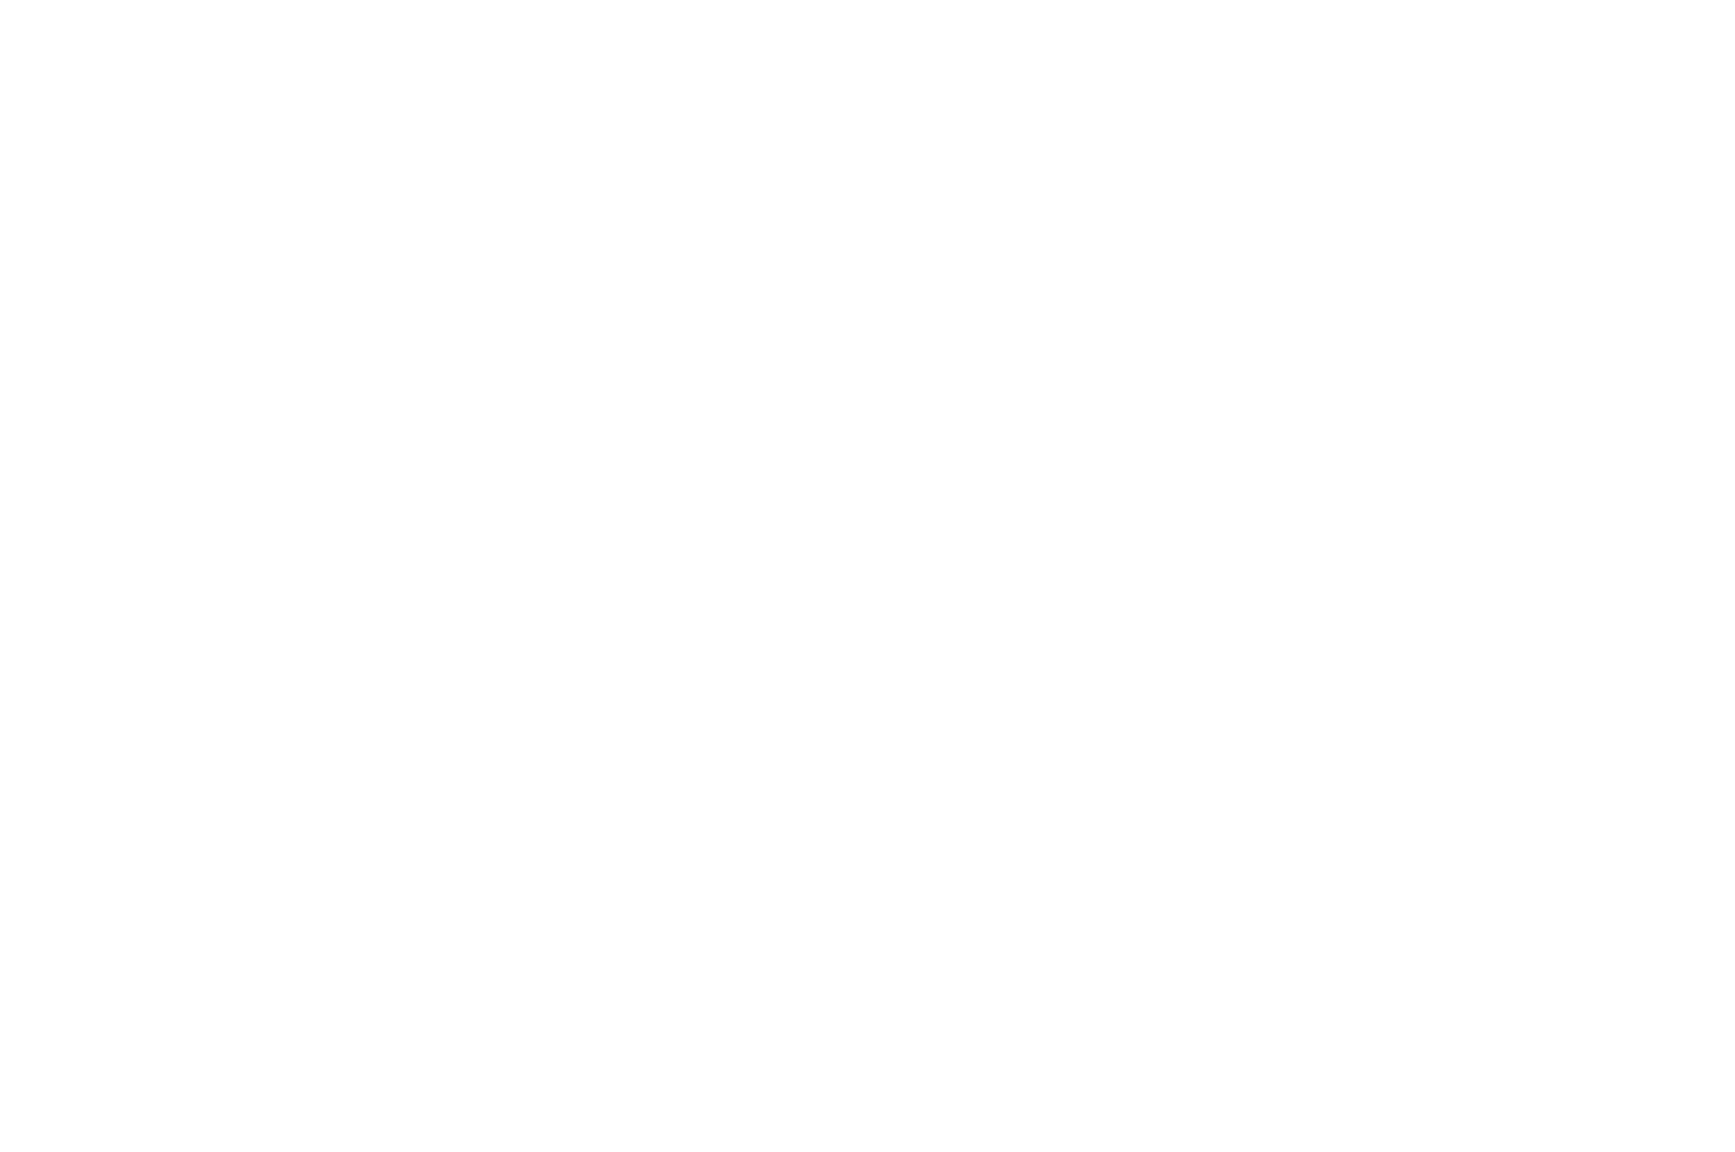 OFFICIAL SELECTION - Reedy Reels - 2019.png